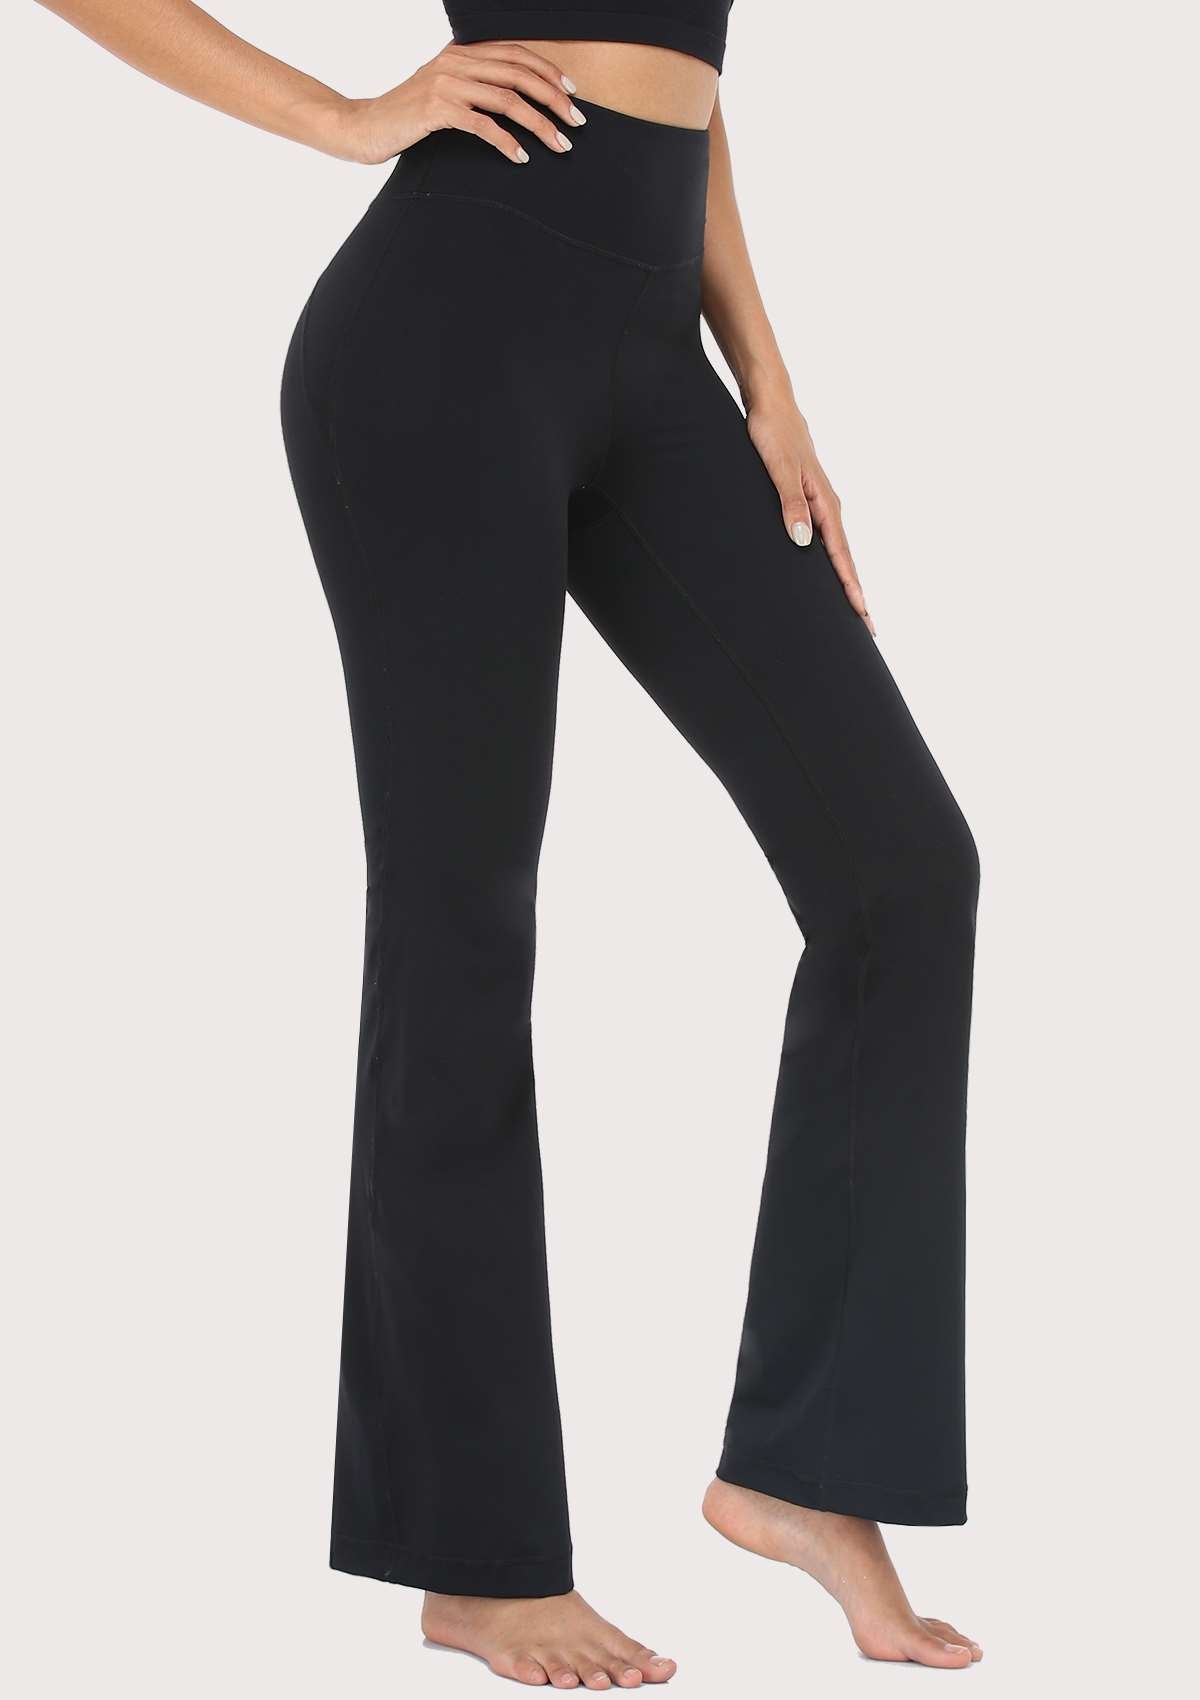 SONGFUL Smooth High Waisted Bootcut Yoga Sports Pants - L / Black